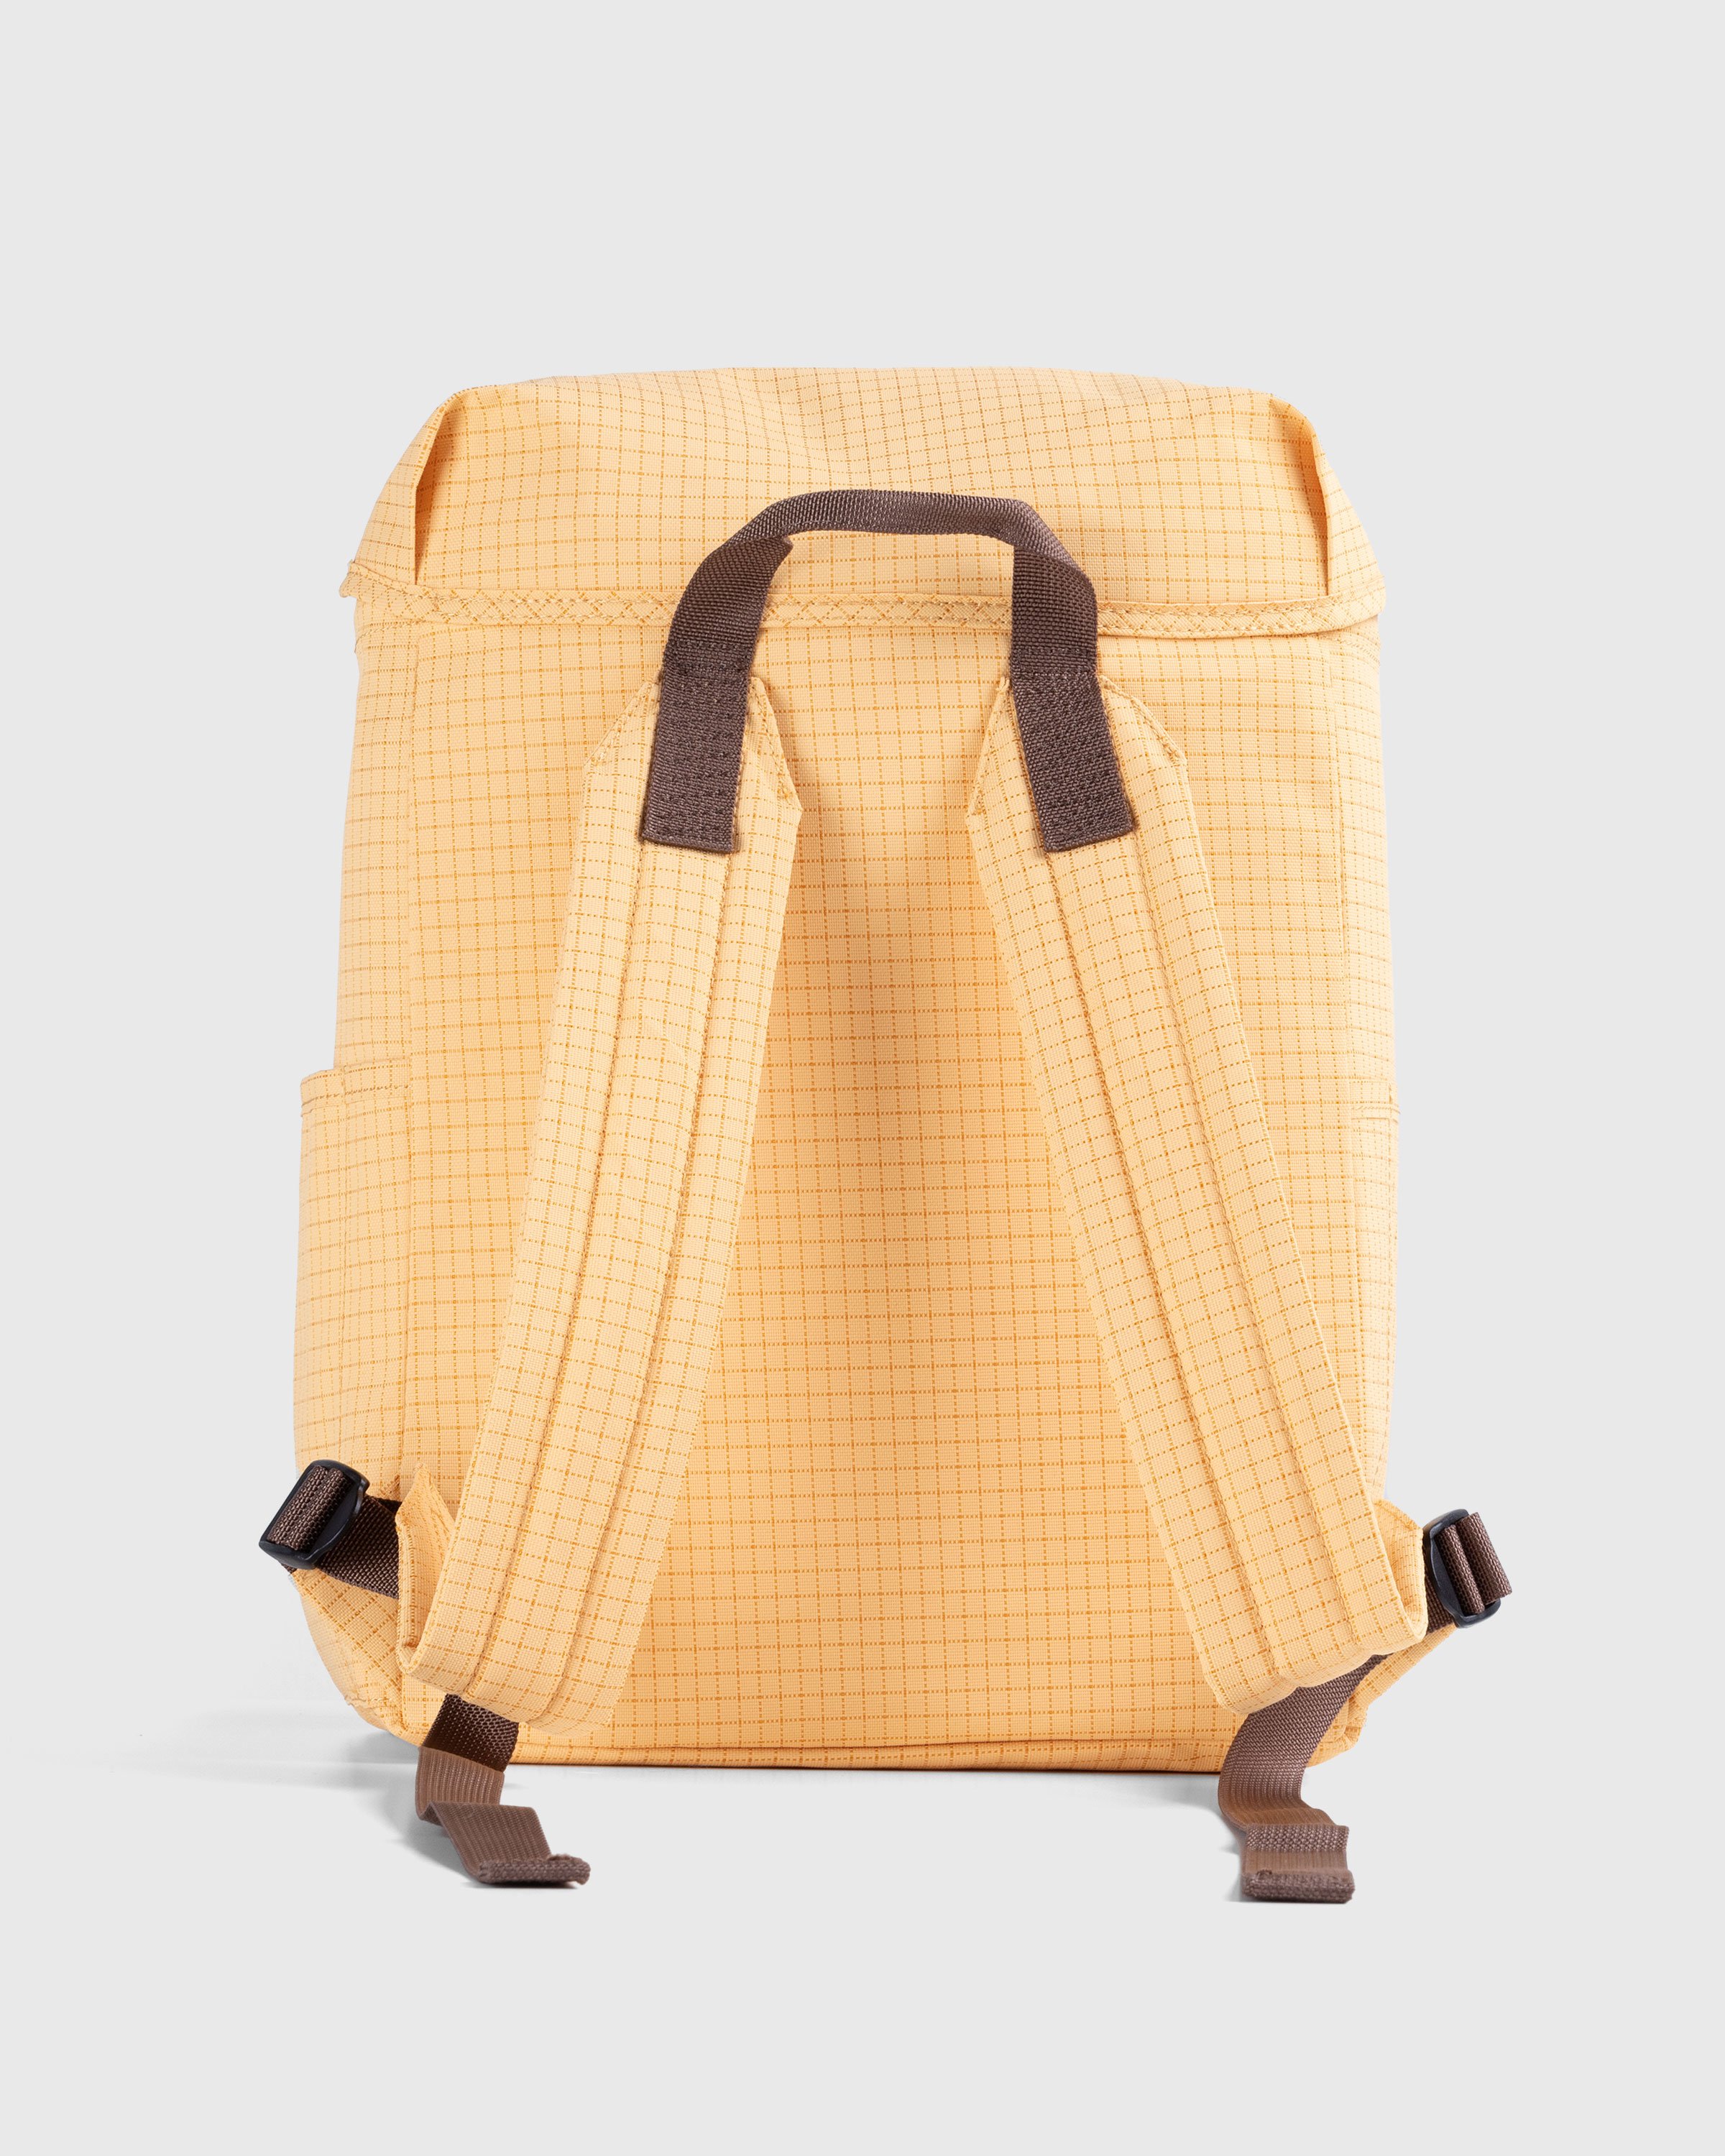 Acne Studios - Ripstop Nylon Backpack Yellow/Brown - Accessories - Multi - Image 2